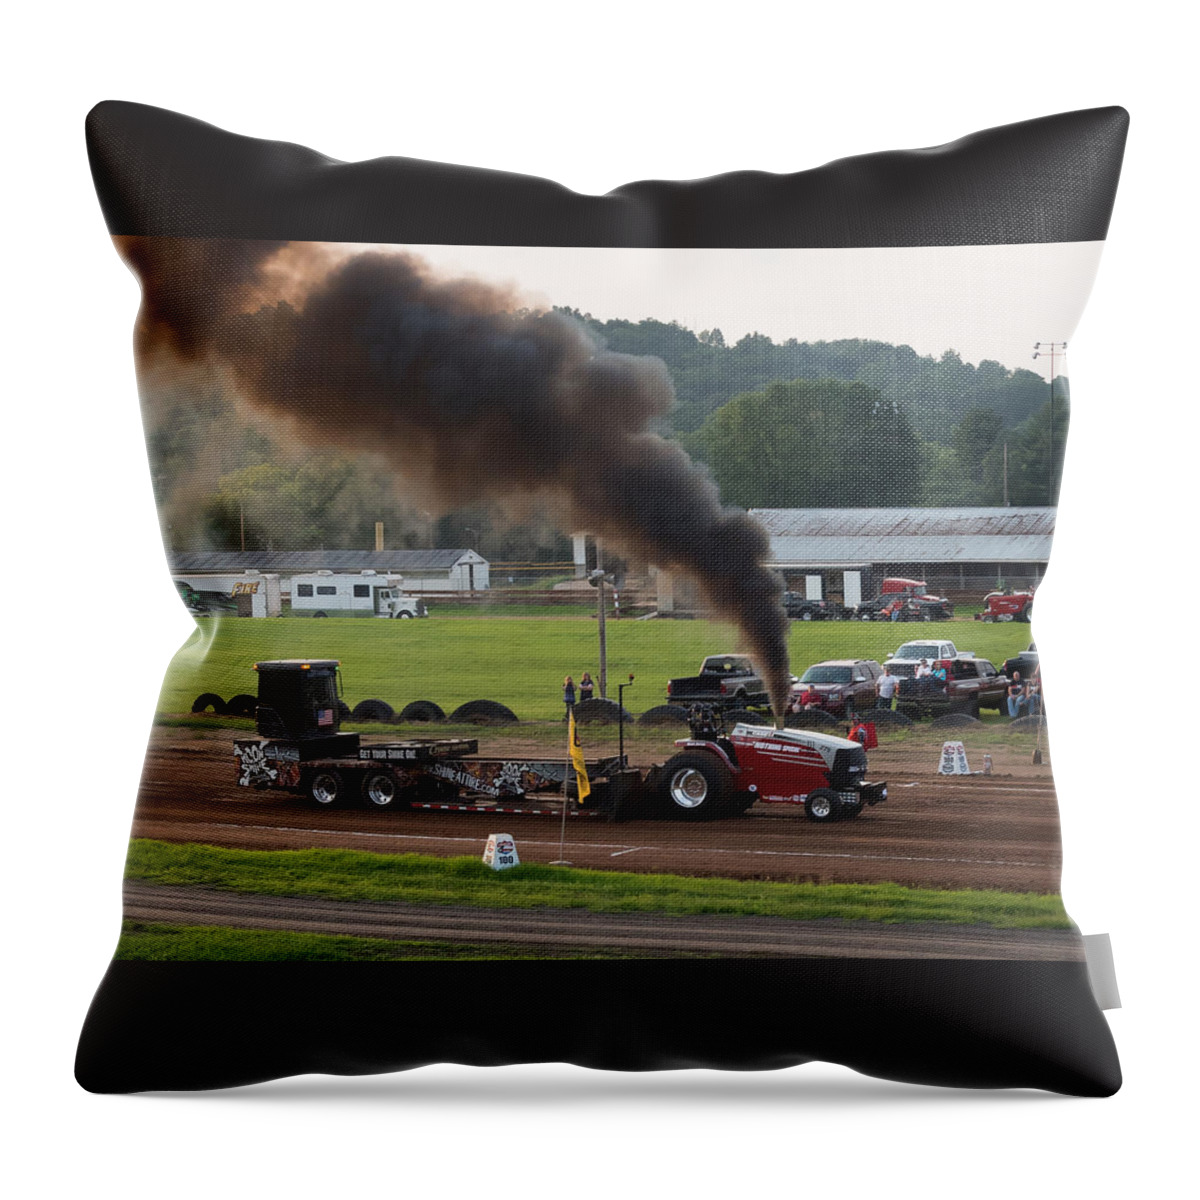 Nothing Special Throw Pillow featuring the photograph Nothing Special by Holden The Moment